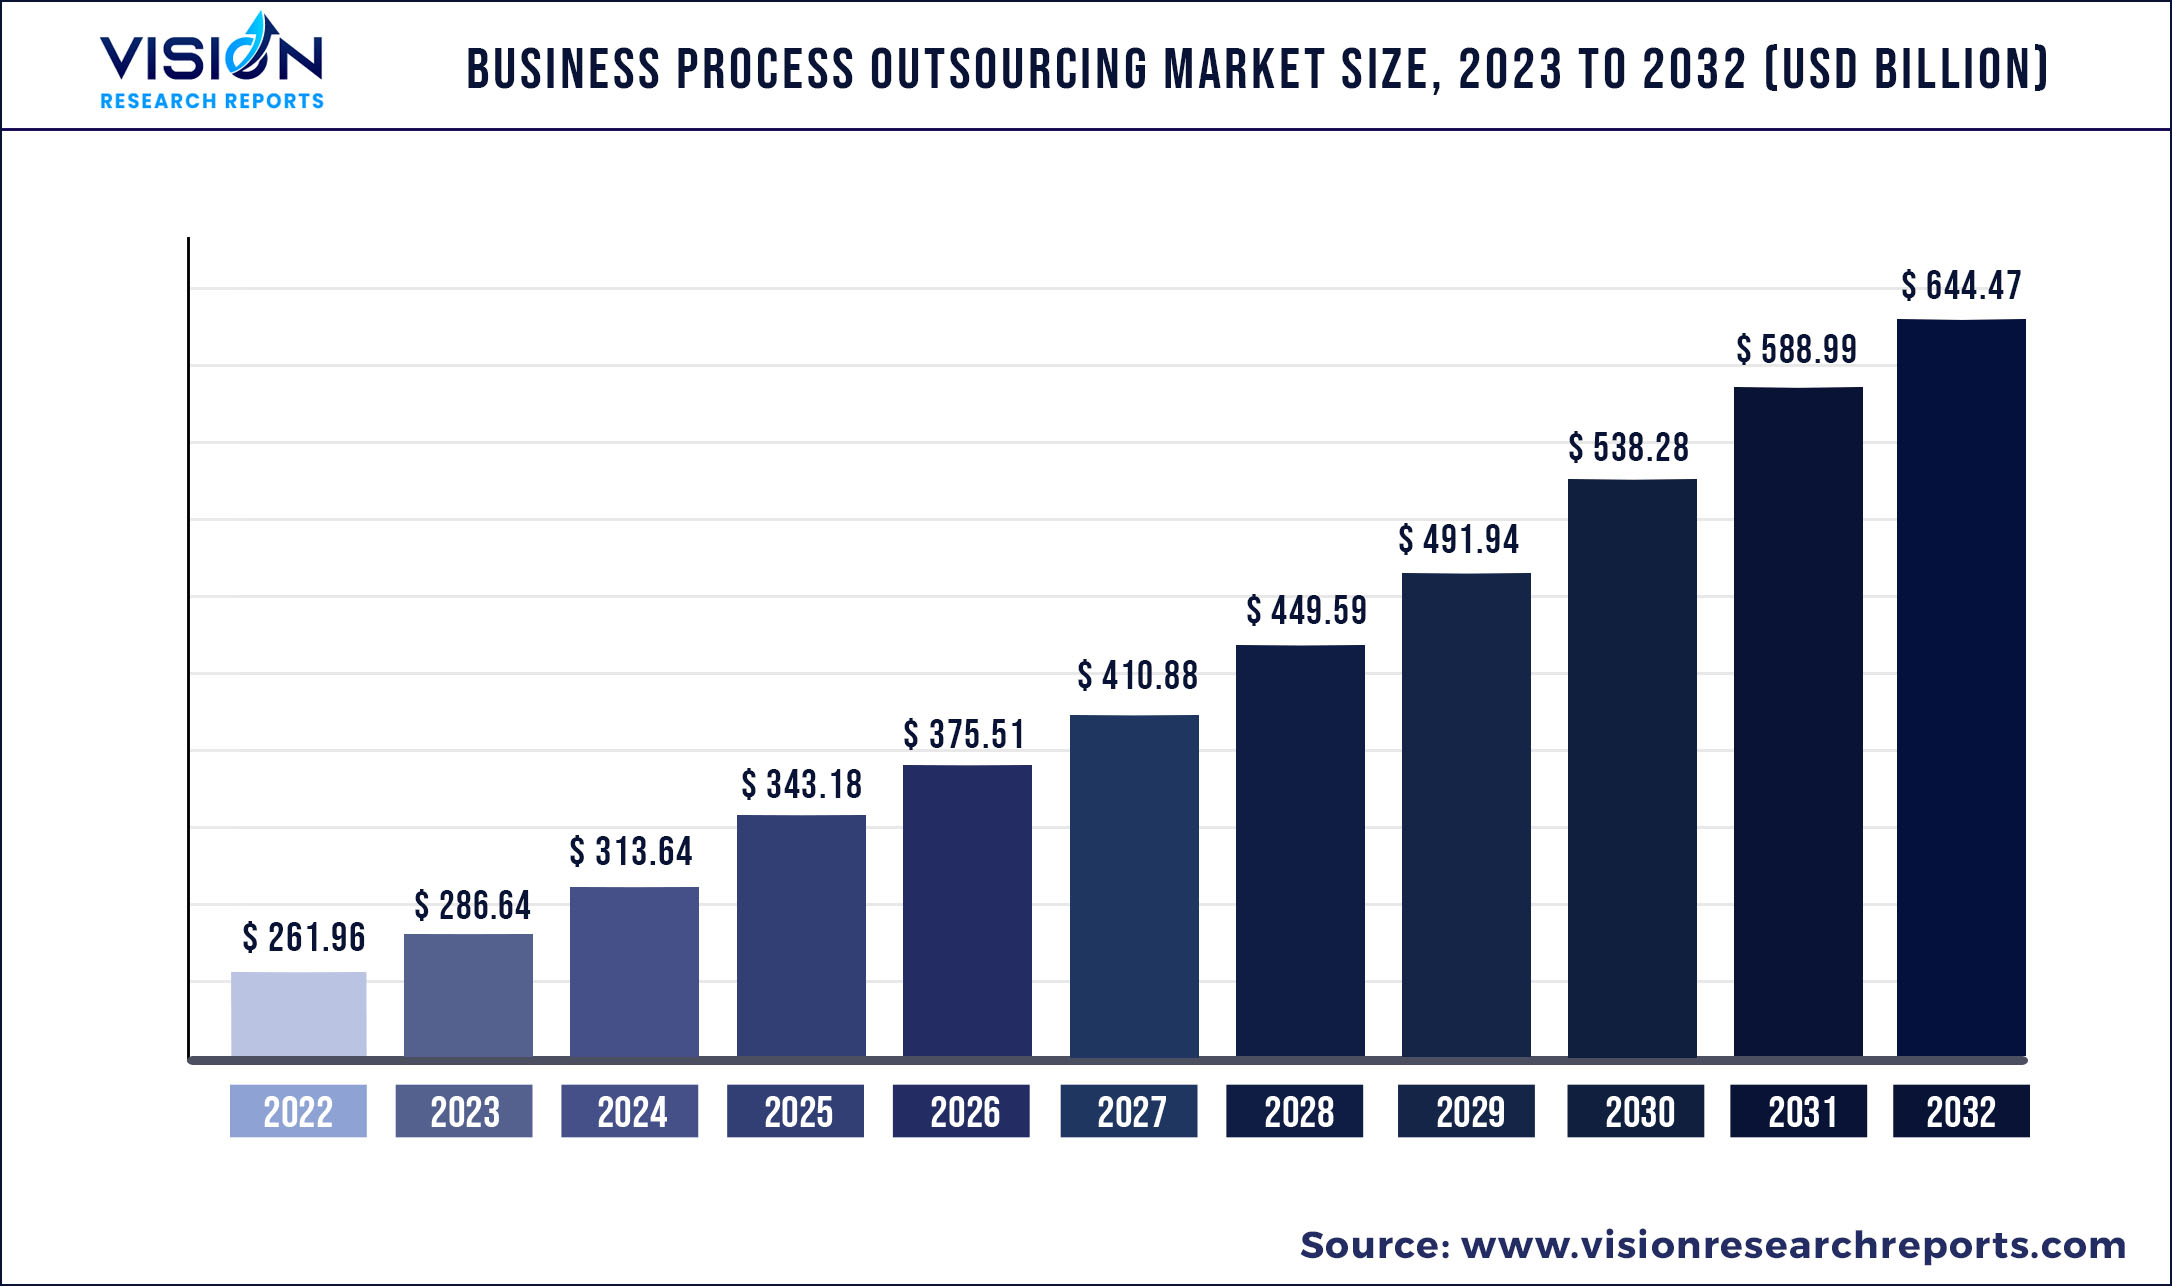 Business Process Outsourcing Market Size 2023 to 2032